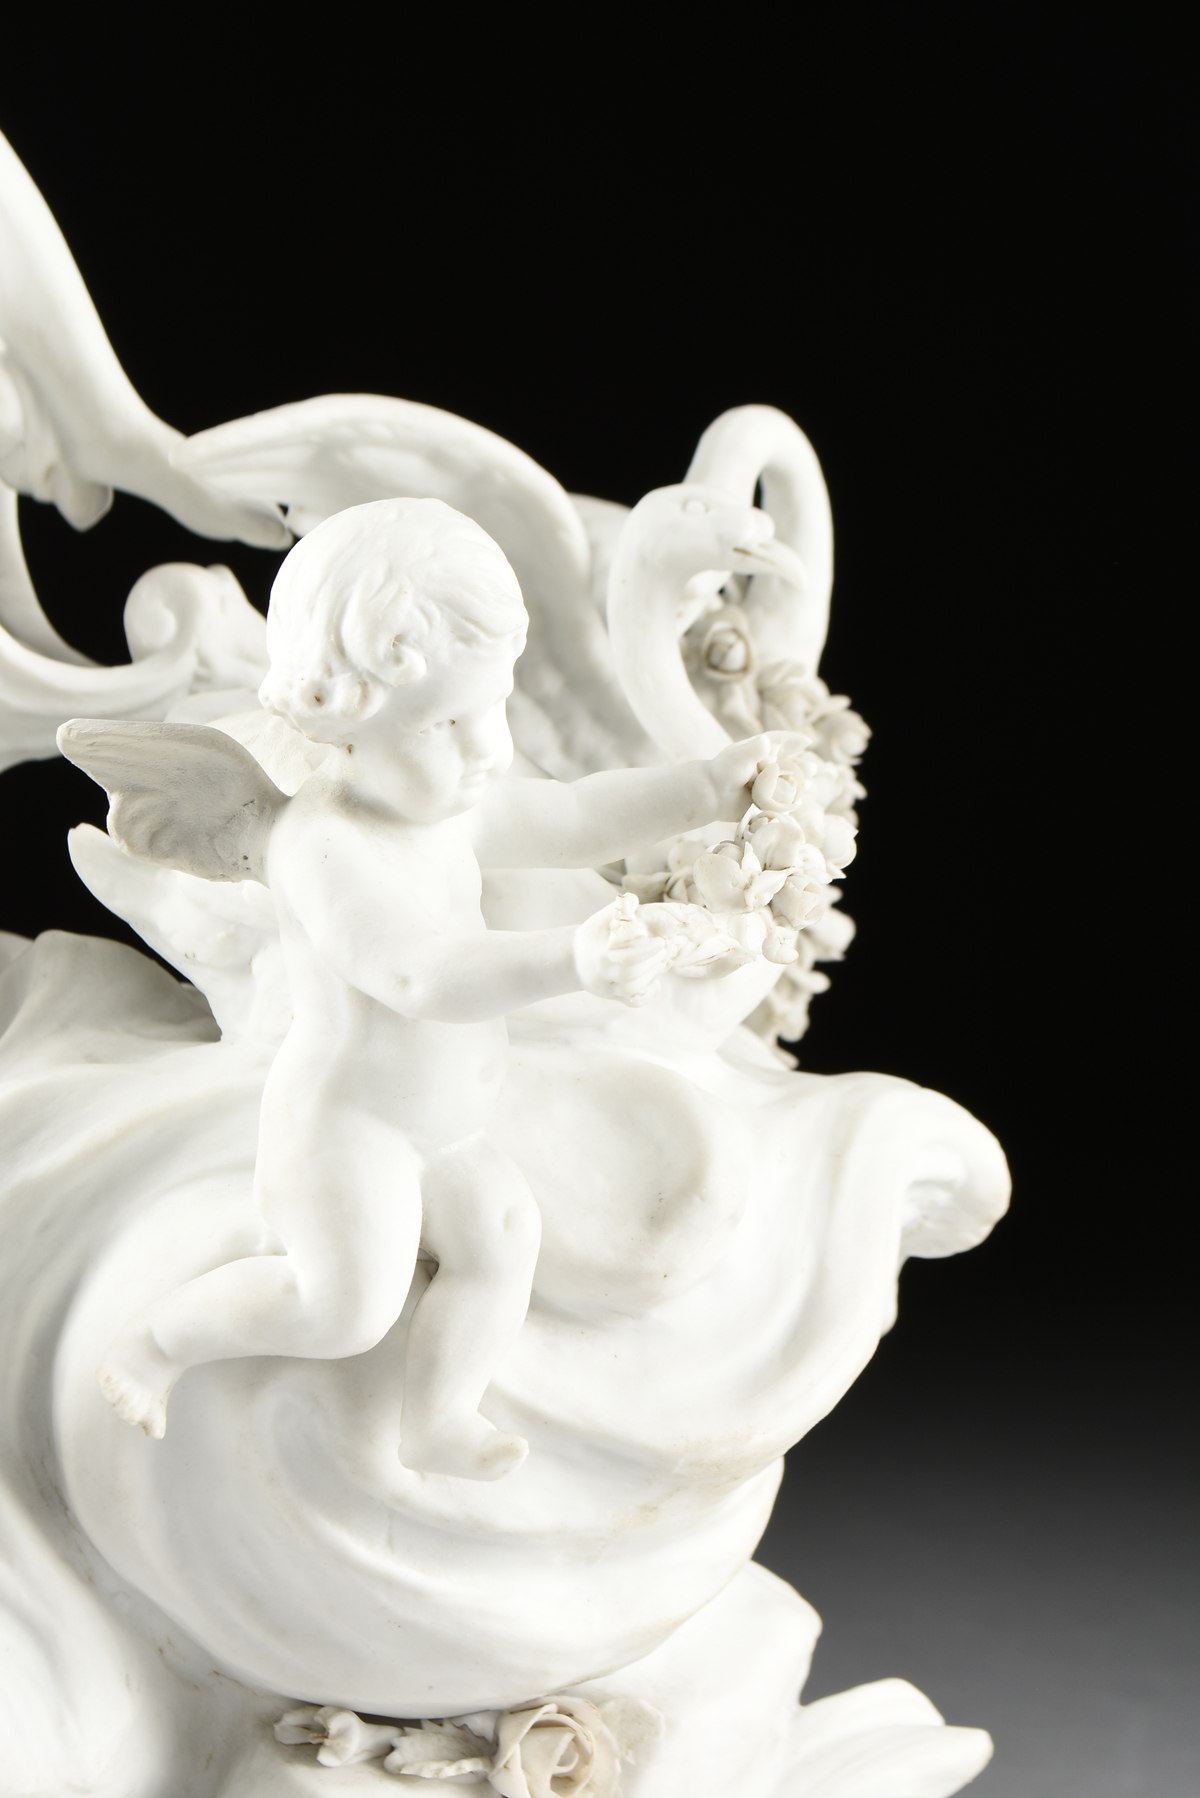 A BAROQUE REVIVAL BISQUE PORCELAIN FIGURAL GROUPING, "Allegory of Spring," POSSIBLY GERMAN, LATE - Image 5 of 11